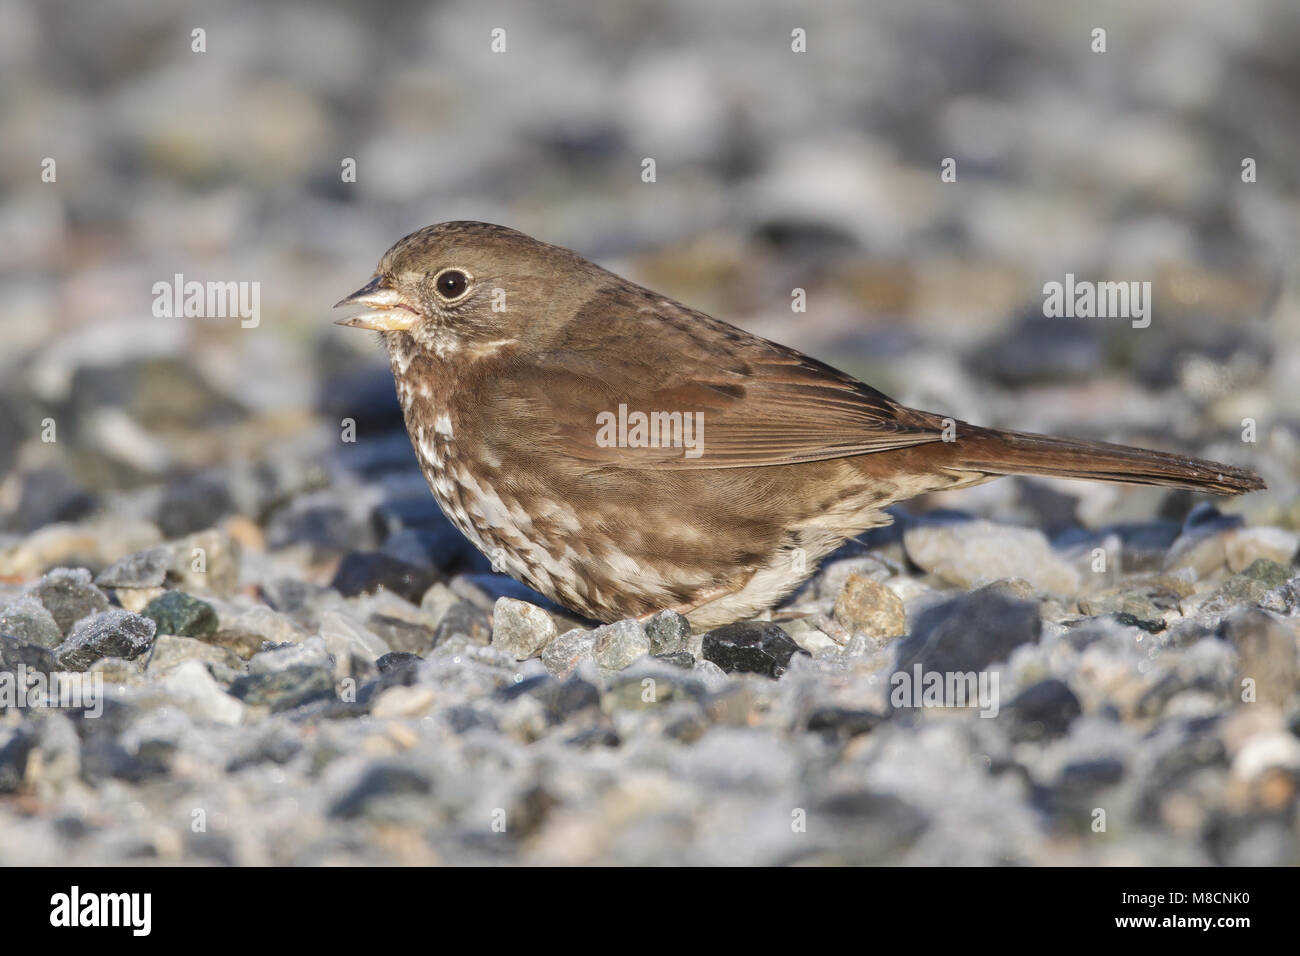 Grauwe Roodstaartgors foeragerend op de grond, Sooty Fox Sparrow foraging on the ground Stock Photo